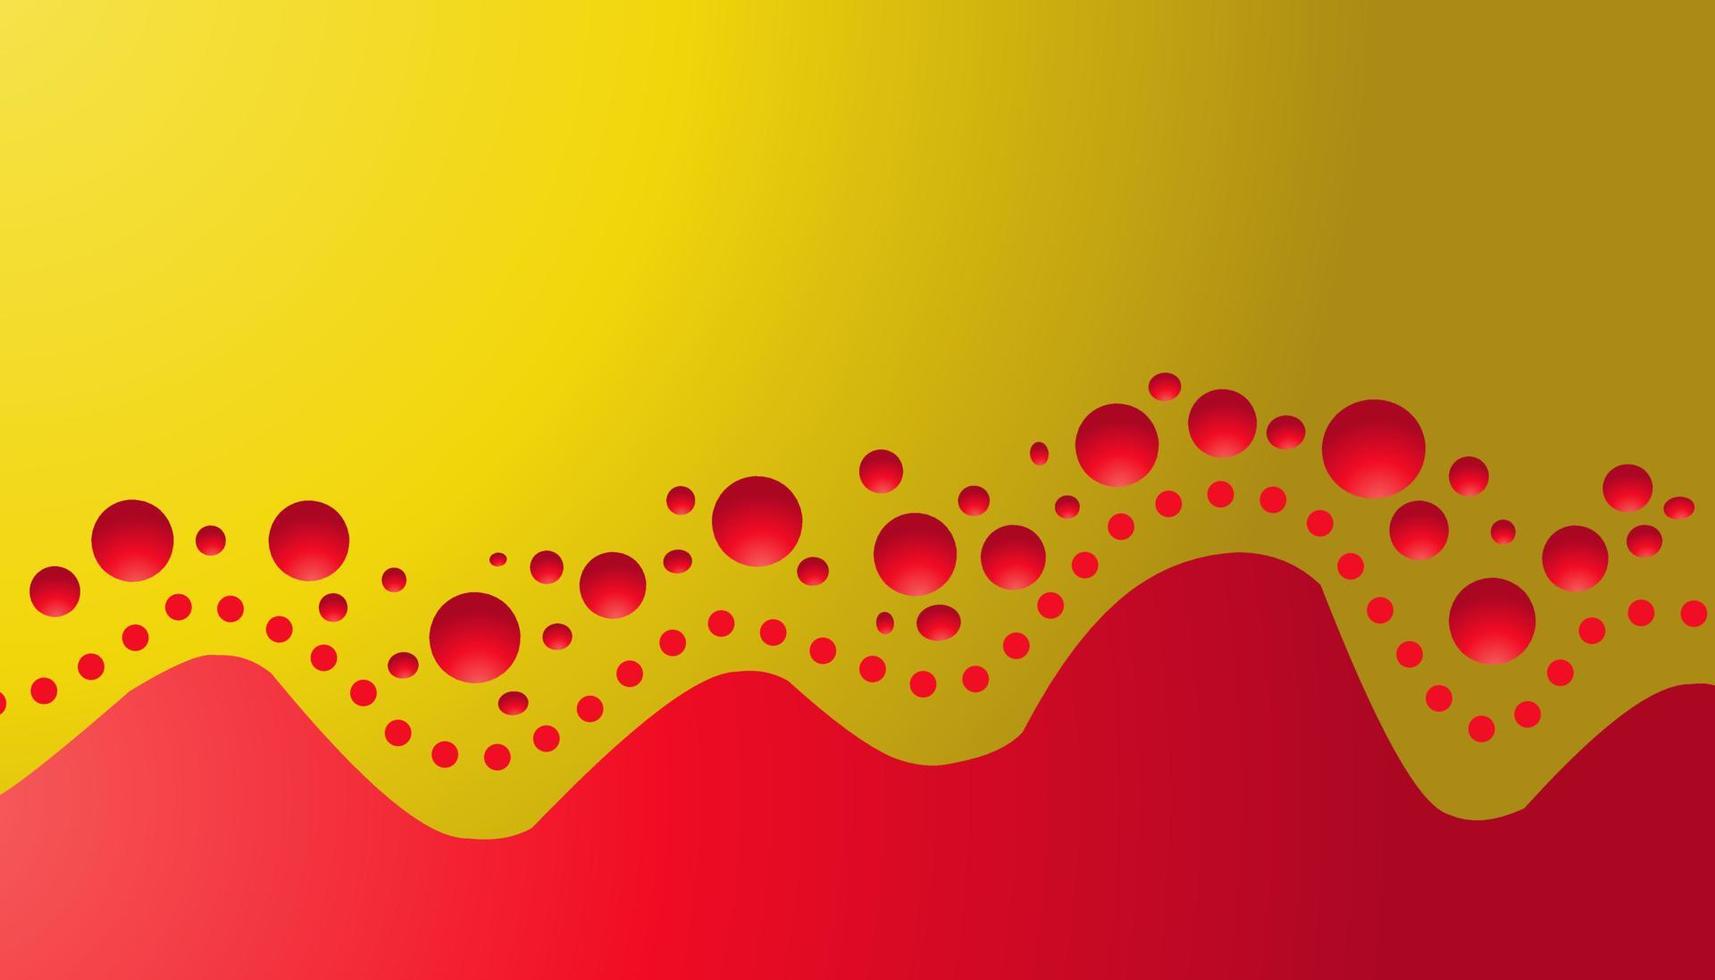 Background illustration gold with red liquid and balls vector